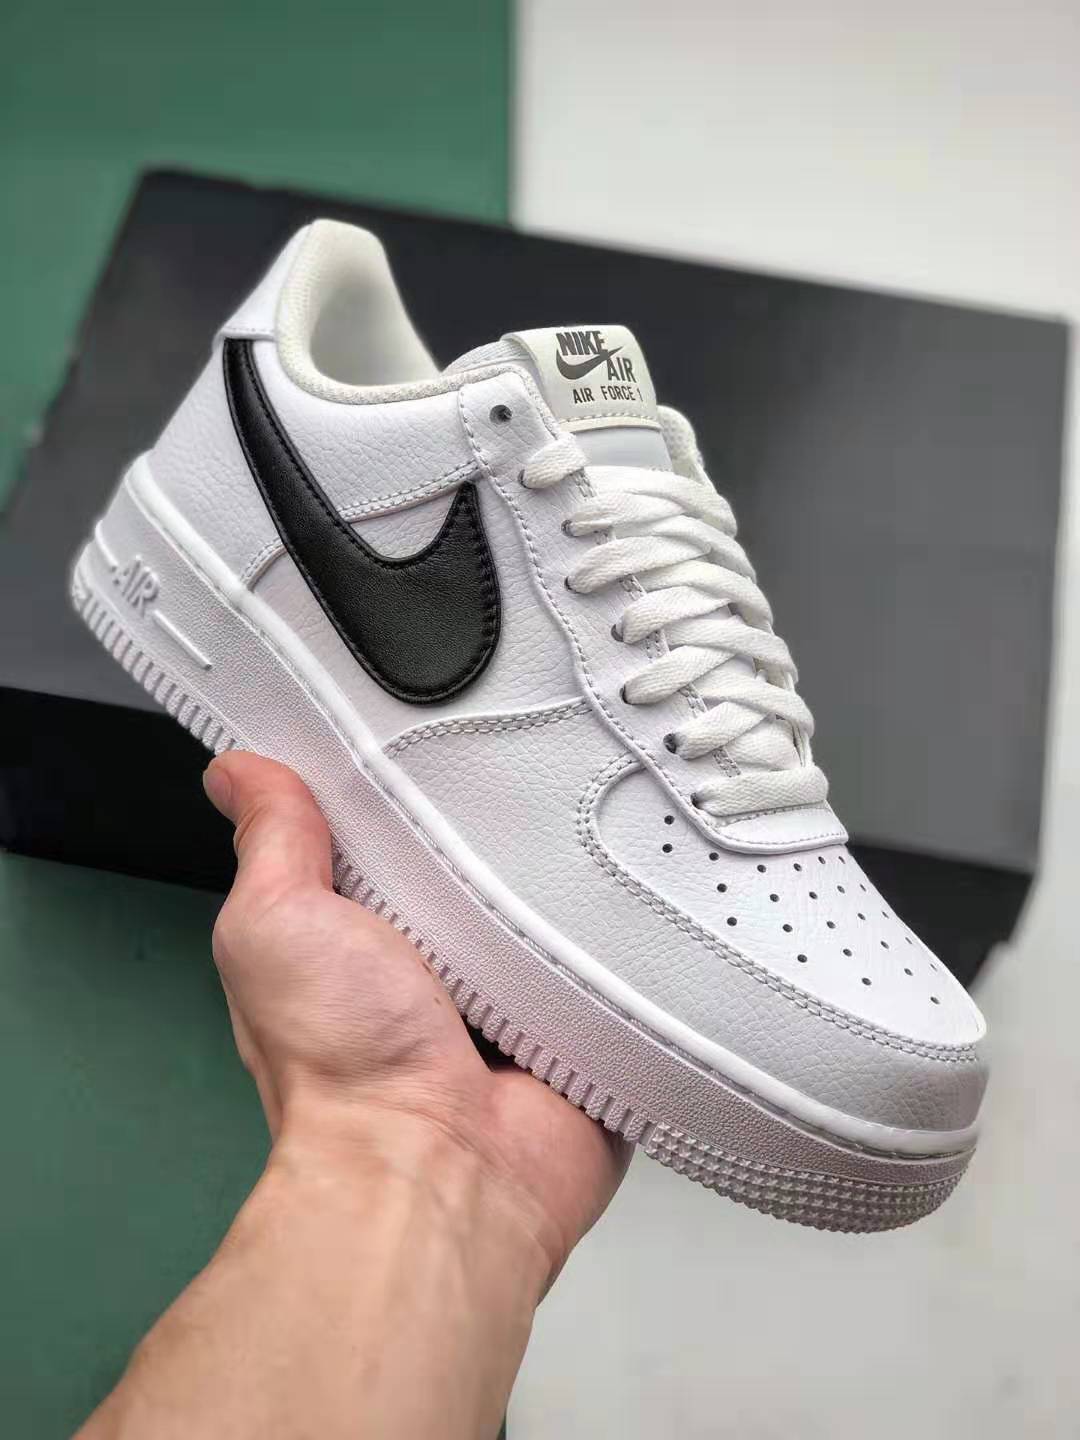 Shop the Classic Nike Air Force 1 '07 Premium 2 'White Black' AT4143-102 for Effortlessly Stylish Looks - Limited Stock!